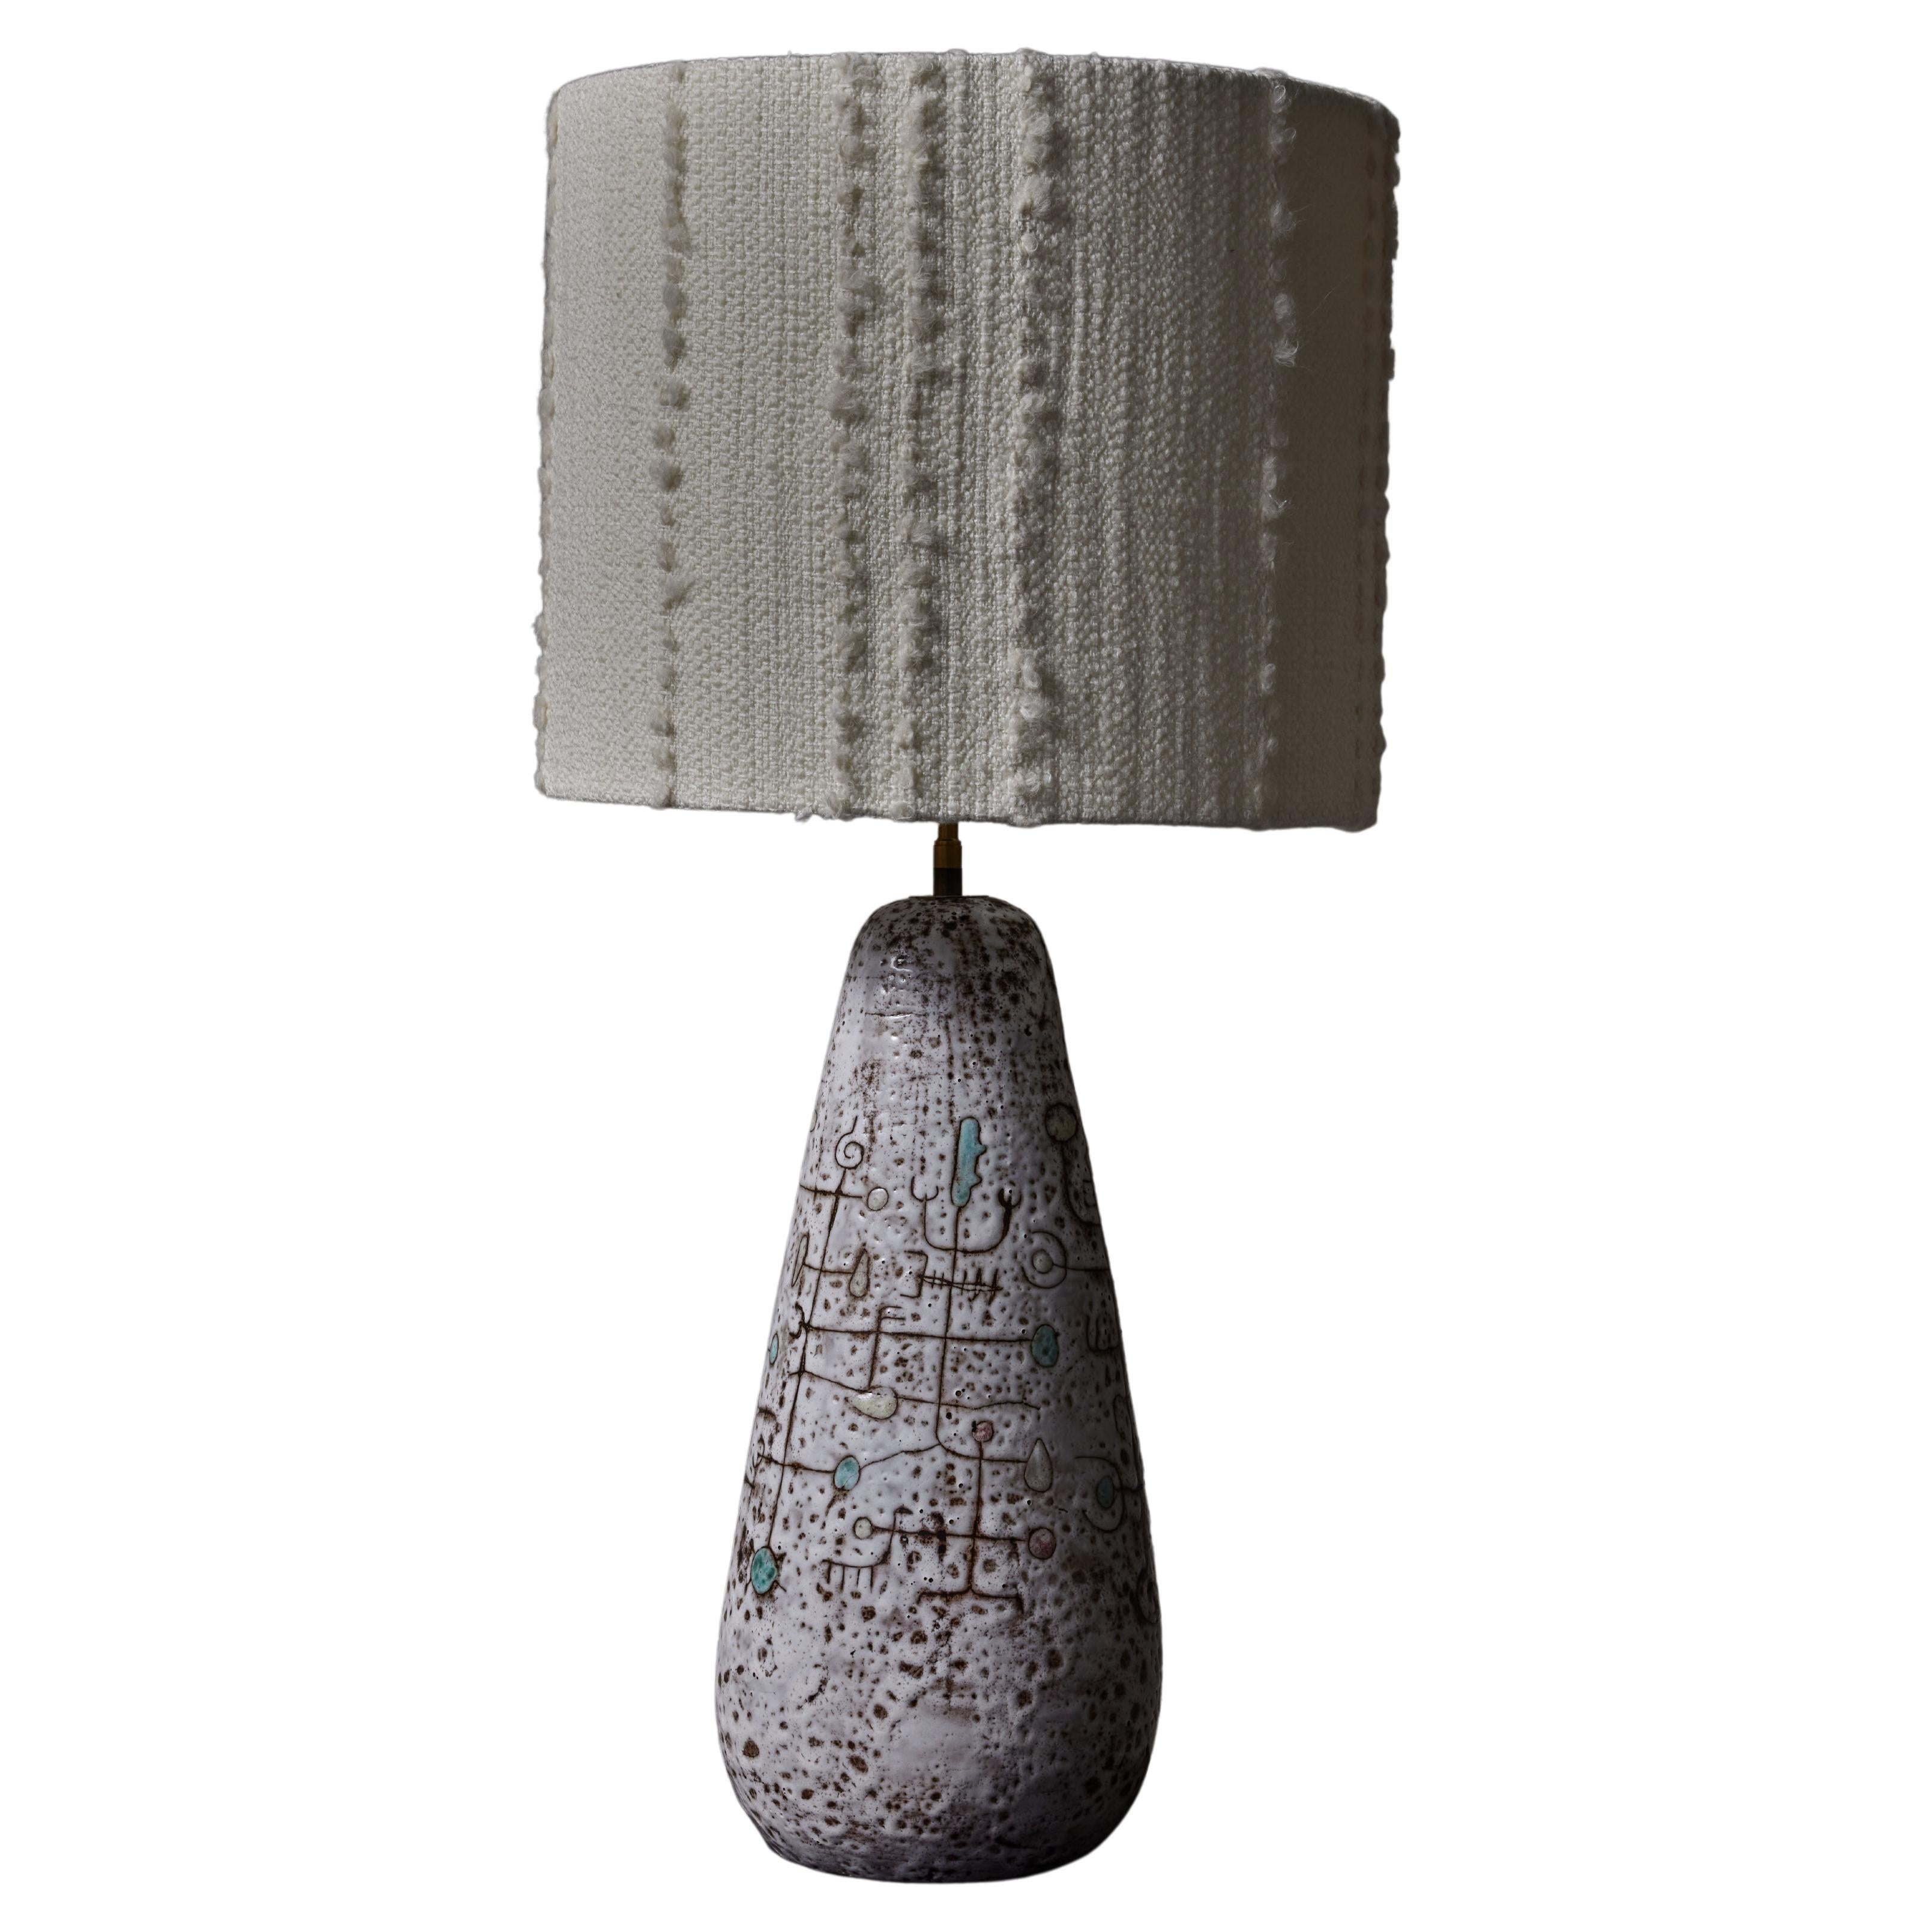 Tall Juliette and Jean Rivier Ceramic Table Lamp